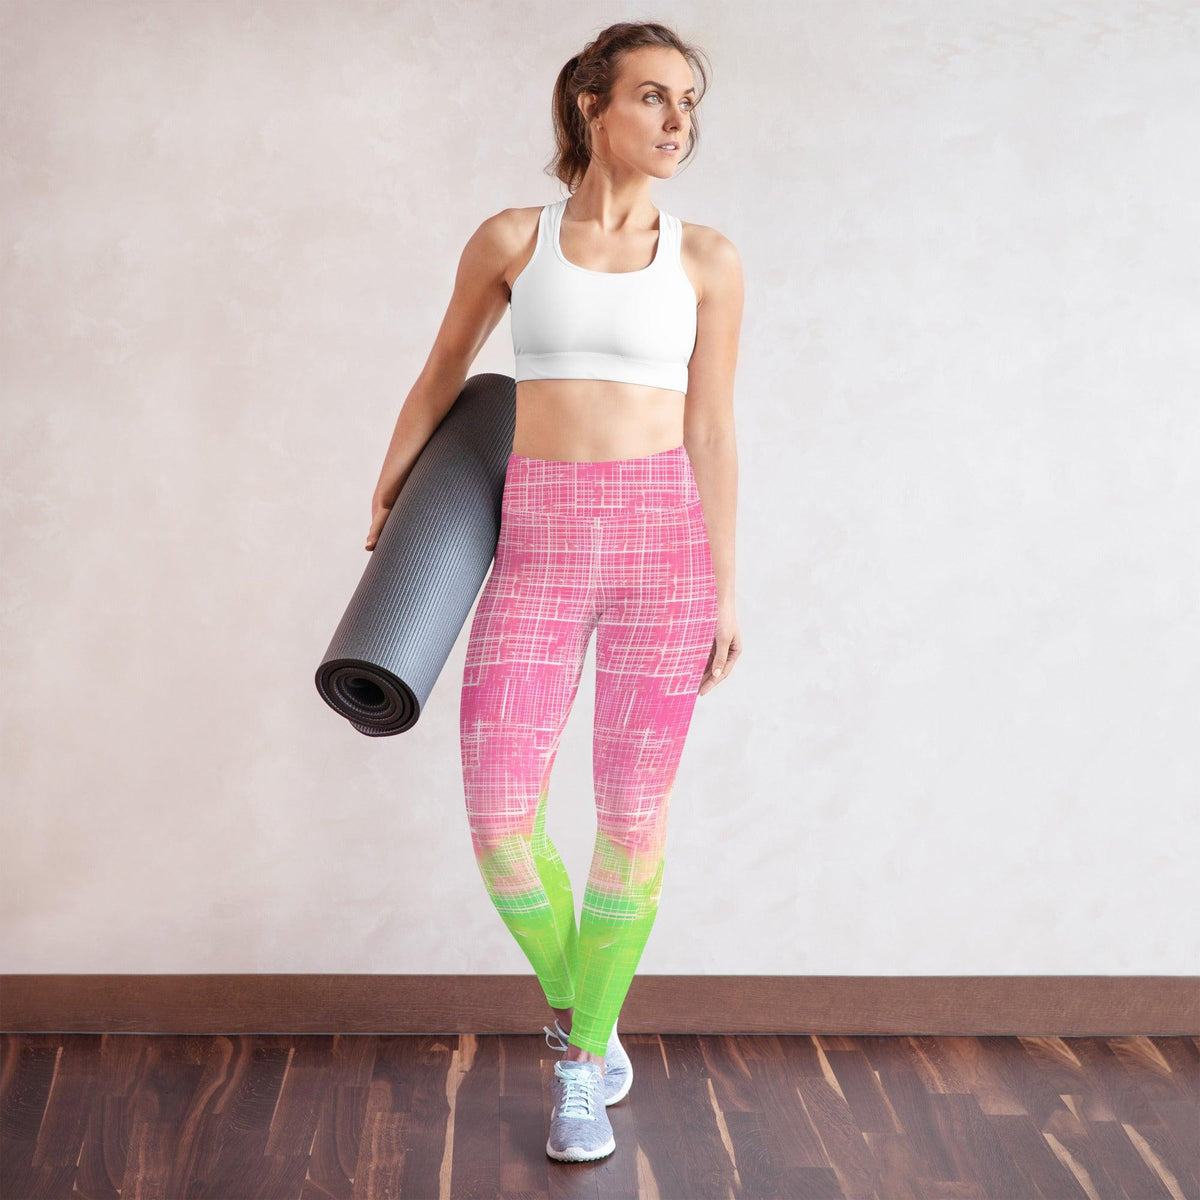 Women's high-stretch yoga leggings for dance and fitness.